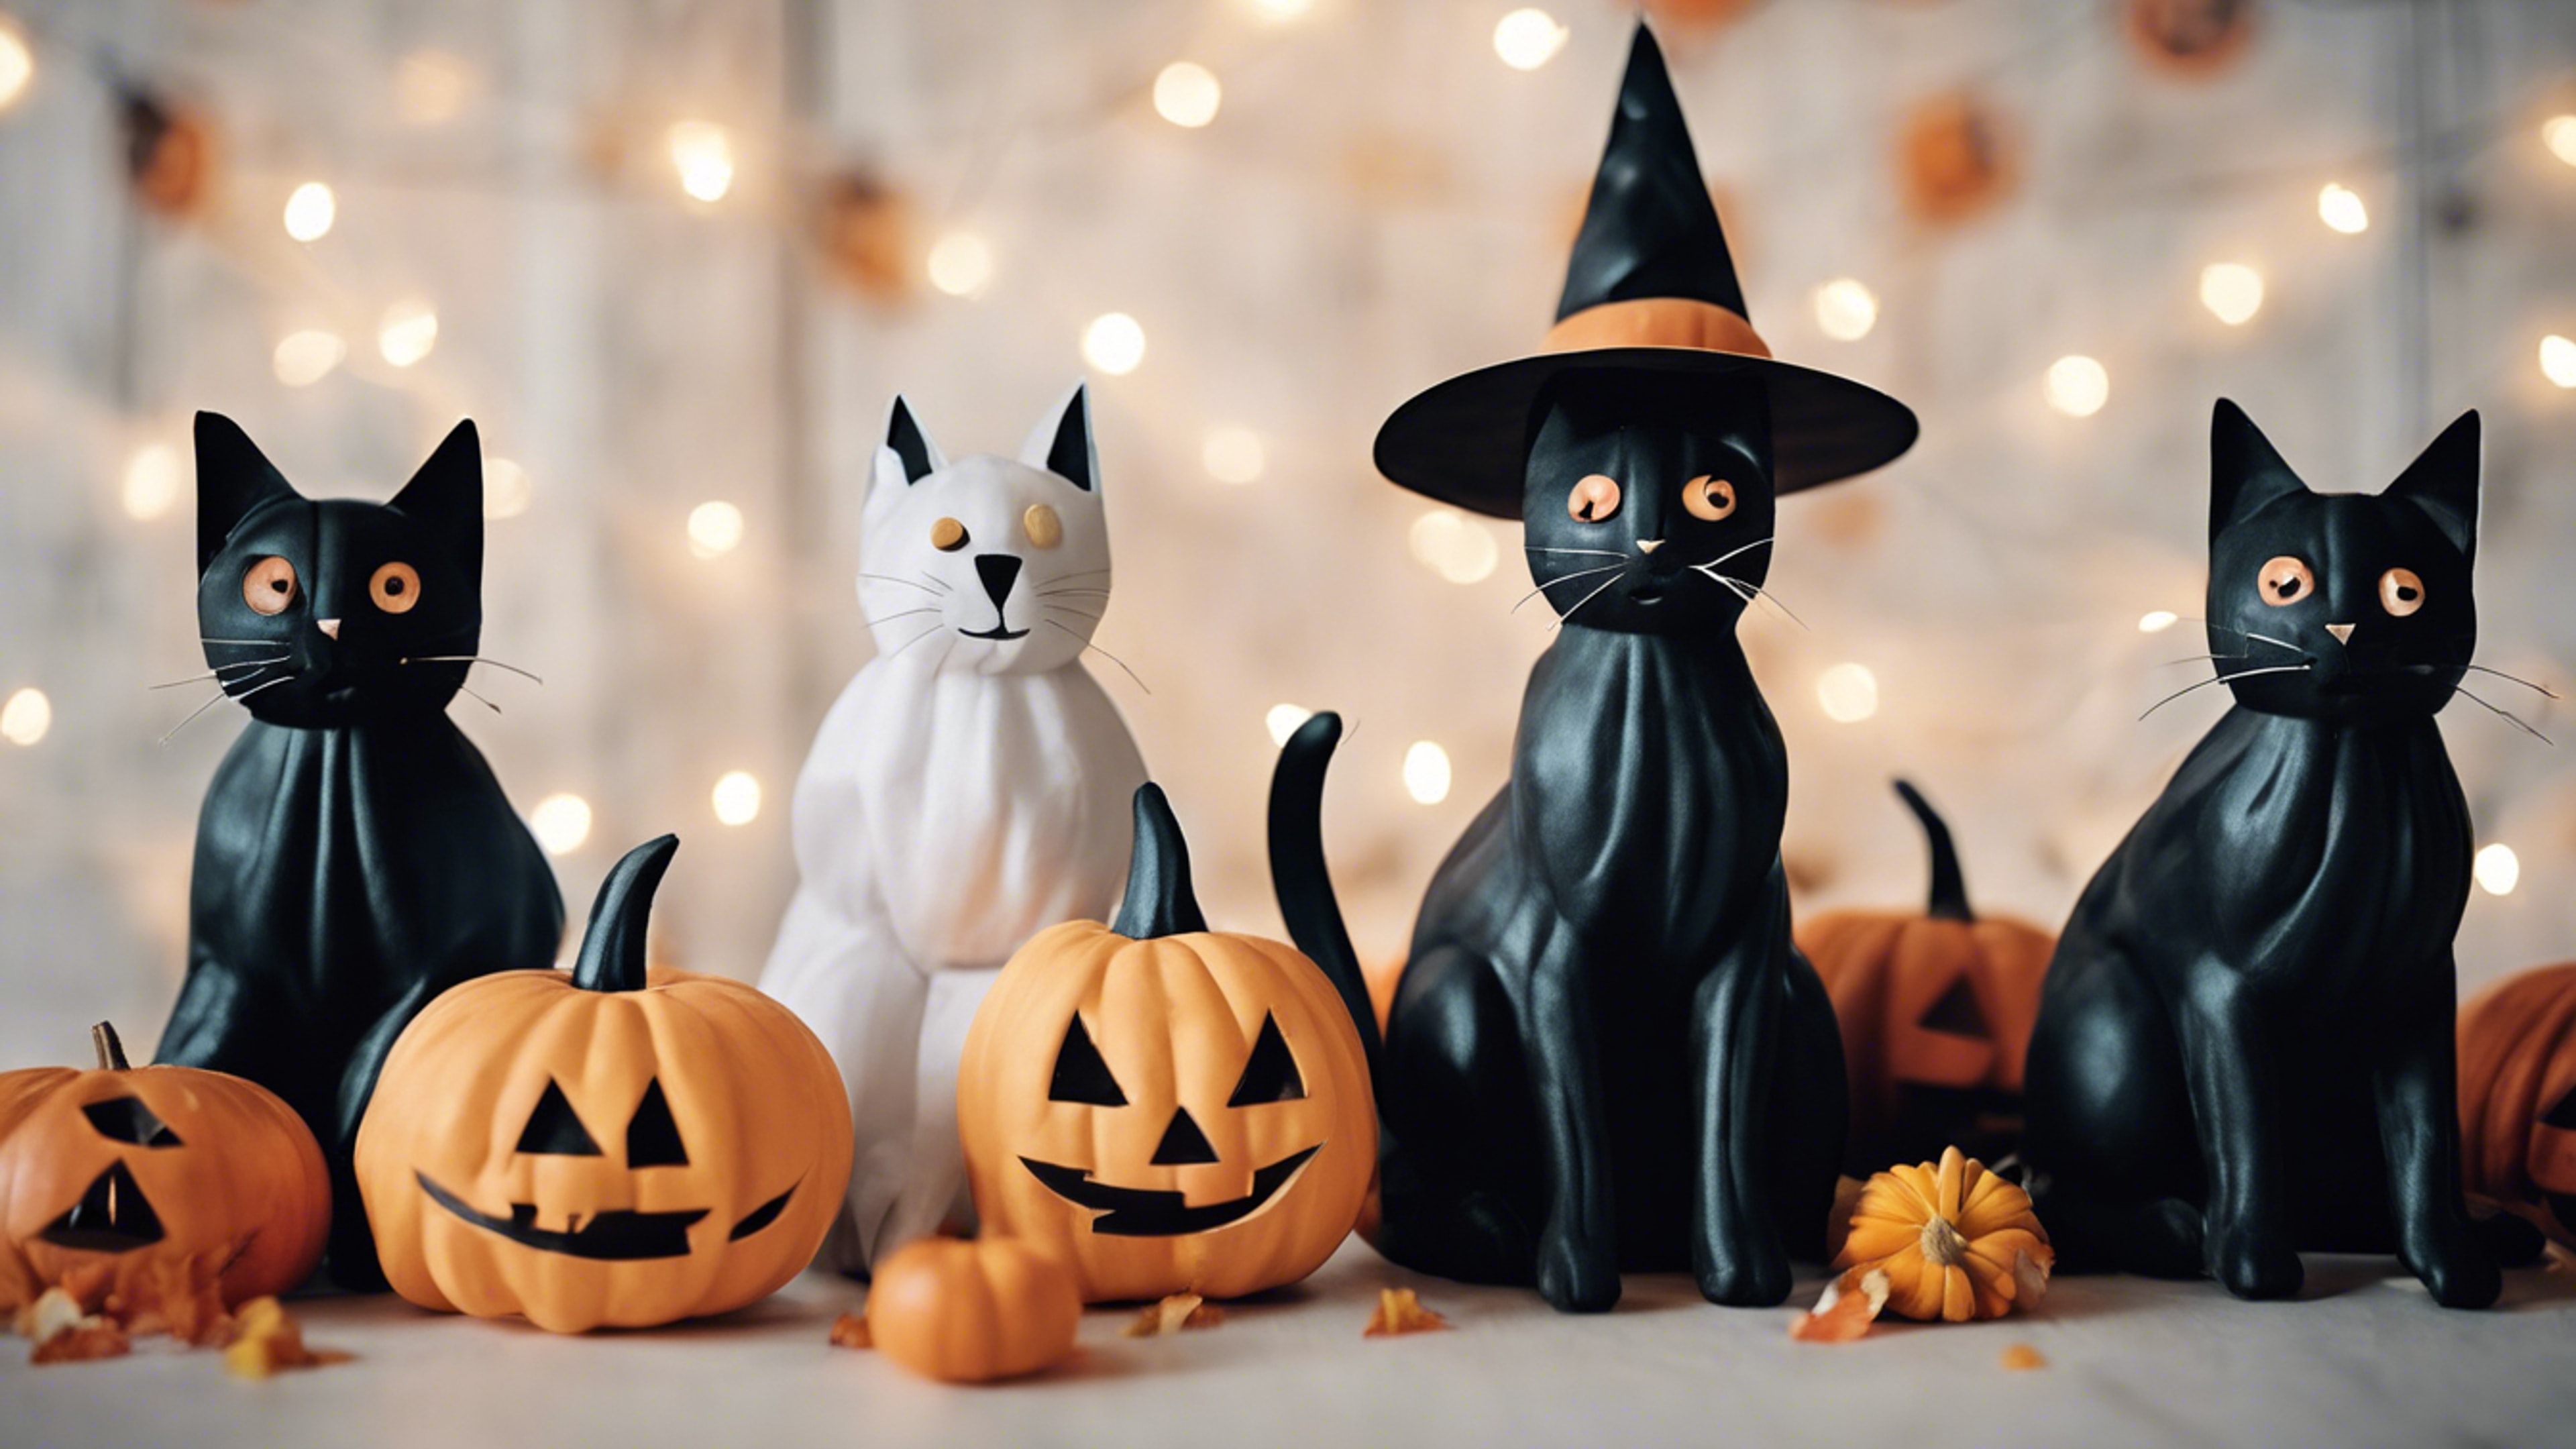 Retro Halloween decorations, featuring tissue ghosts, carved California pumpkins and handmade black cats.壁紙[cae7fe540a804f908cf4]